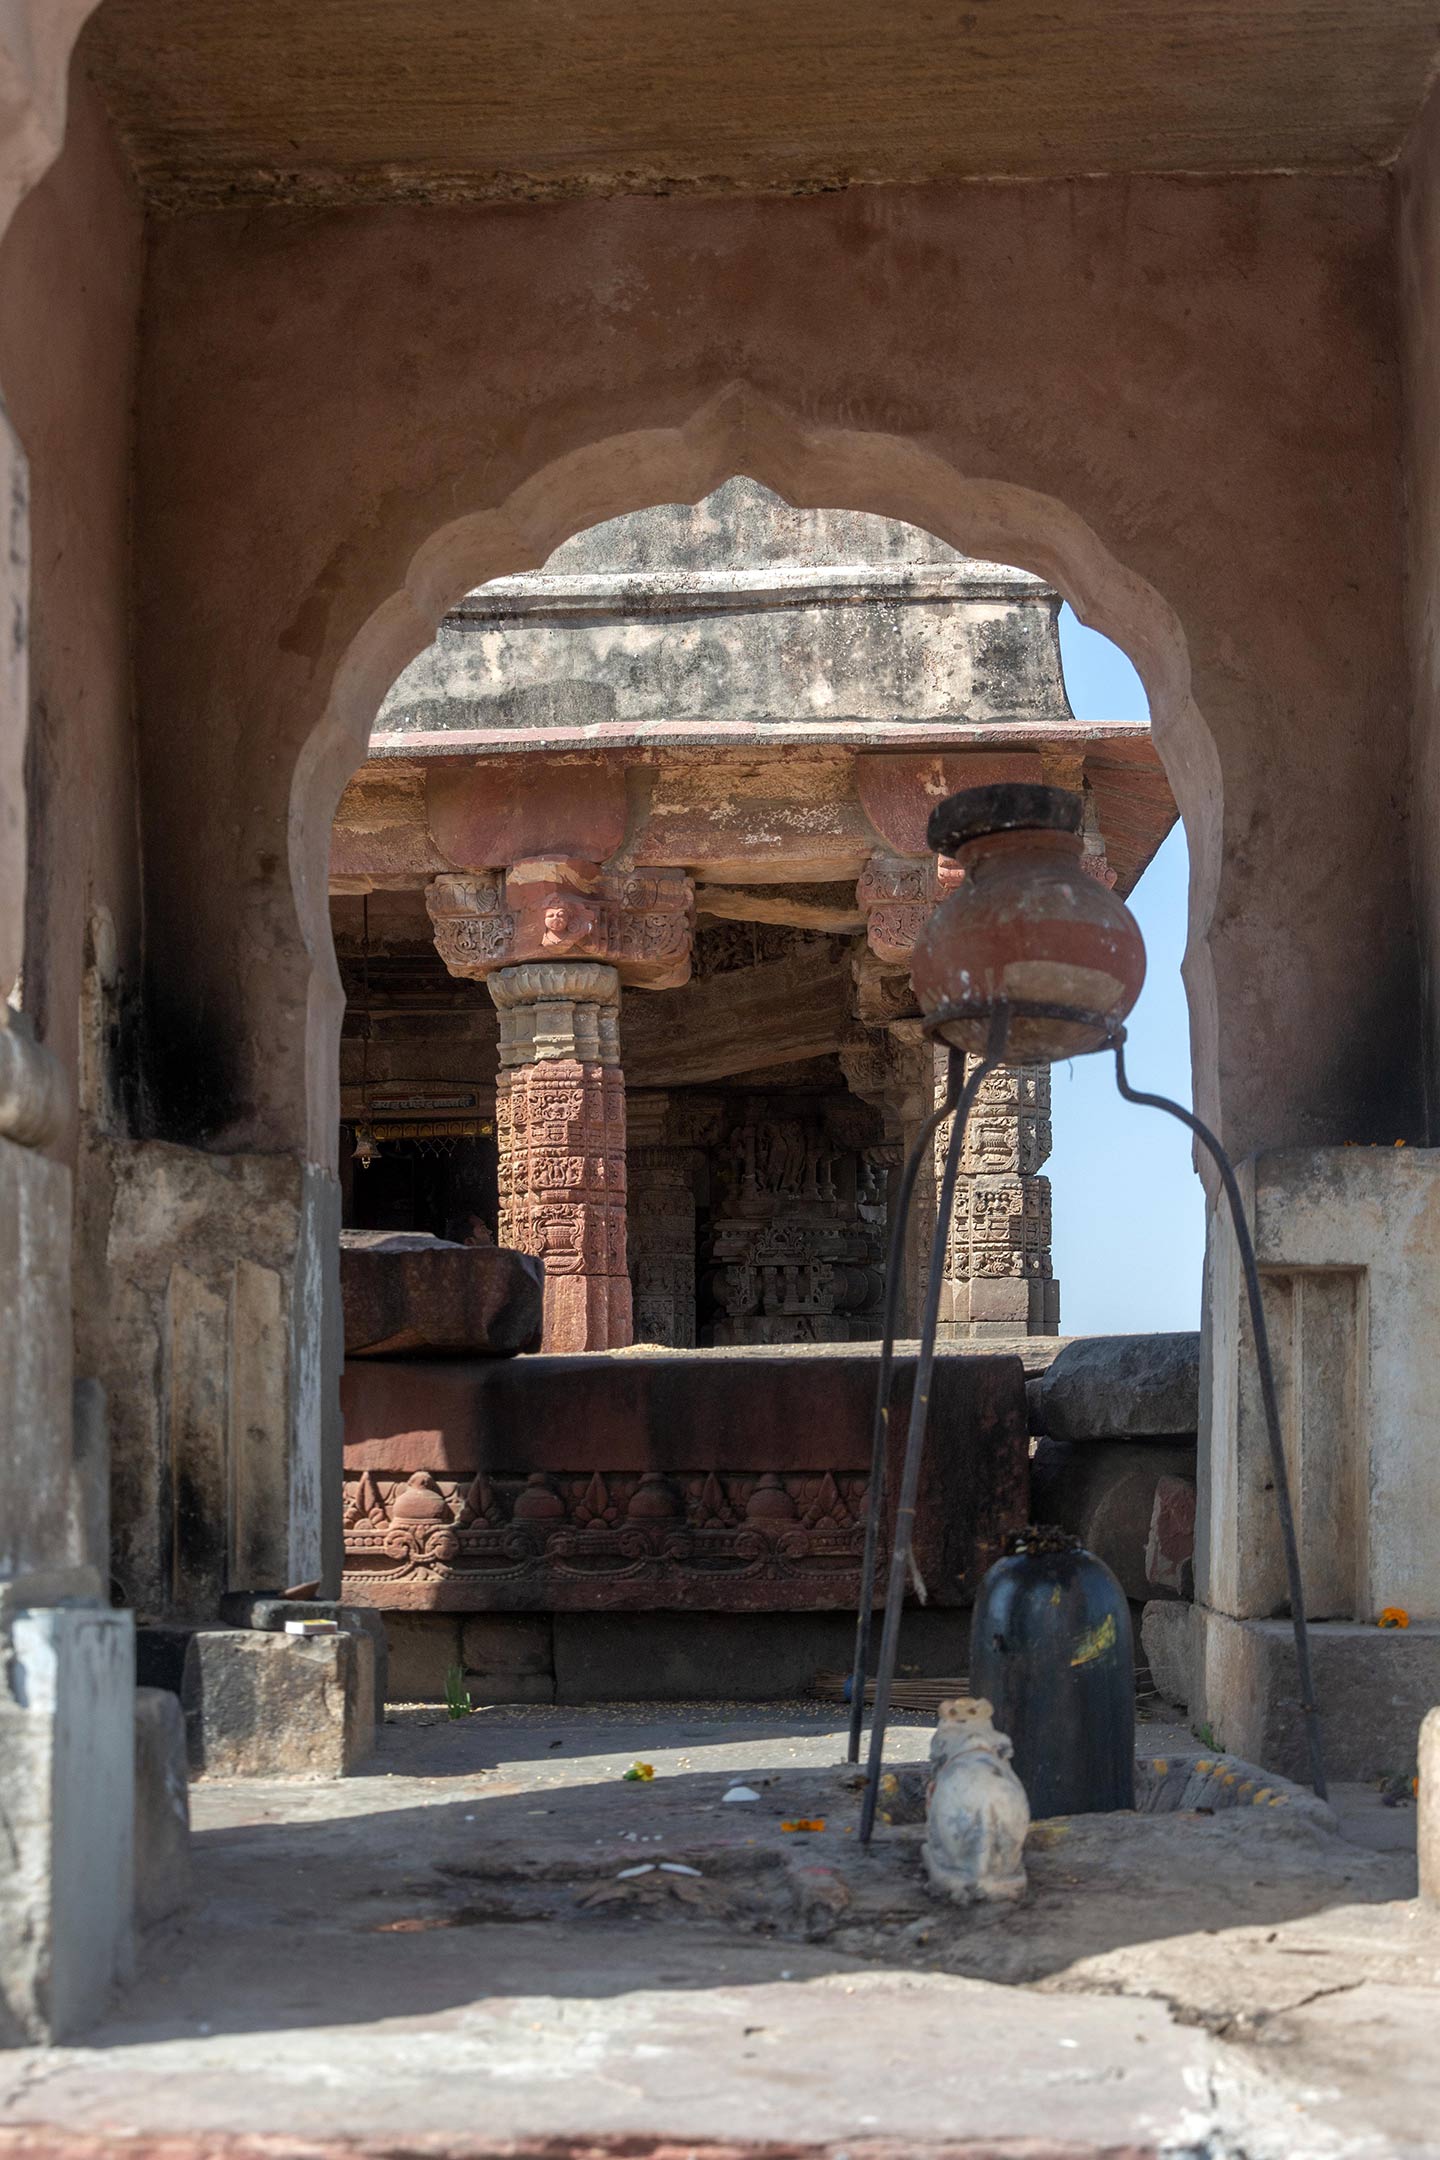 A small shrine, possibly a newer construction, is placed off-centred to the right facing the garbhagriha. The subsidiary shrine has arched openings on the west, (seen here) east and north sides with a rectangular entrance inside an arched niche on the south side. A Shiva lingam made in black stone is installed inside with a Nandi figure next to it. An earthen pot is installed on a tripod which drips water over the Shiva lingam.